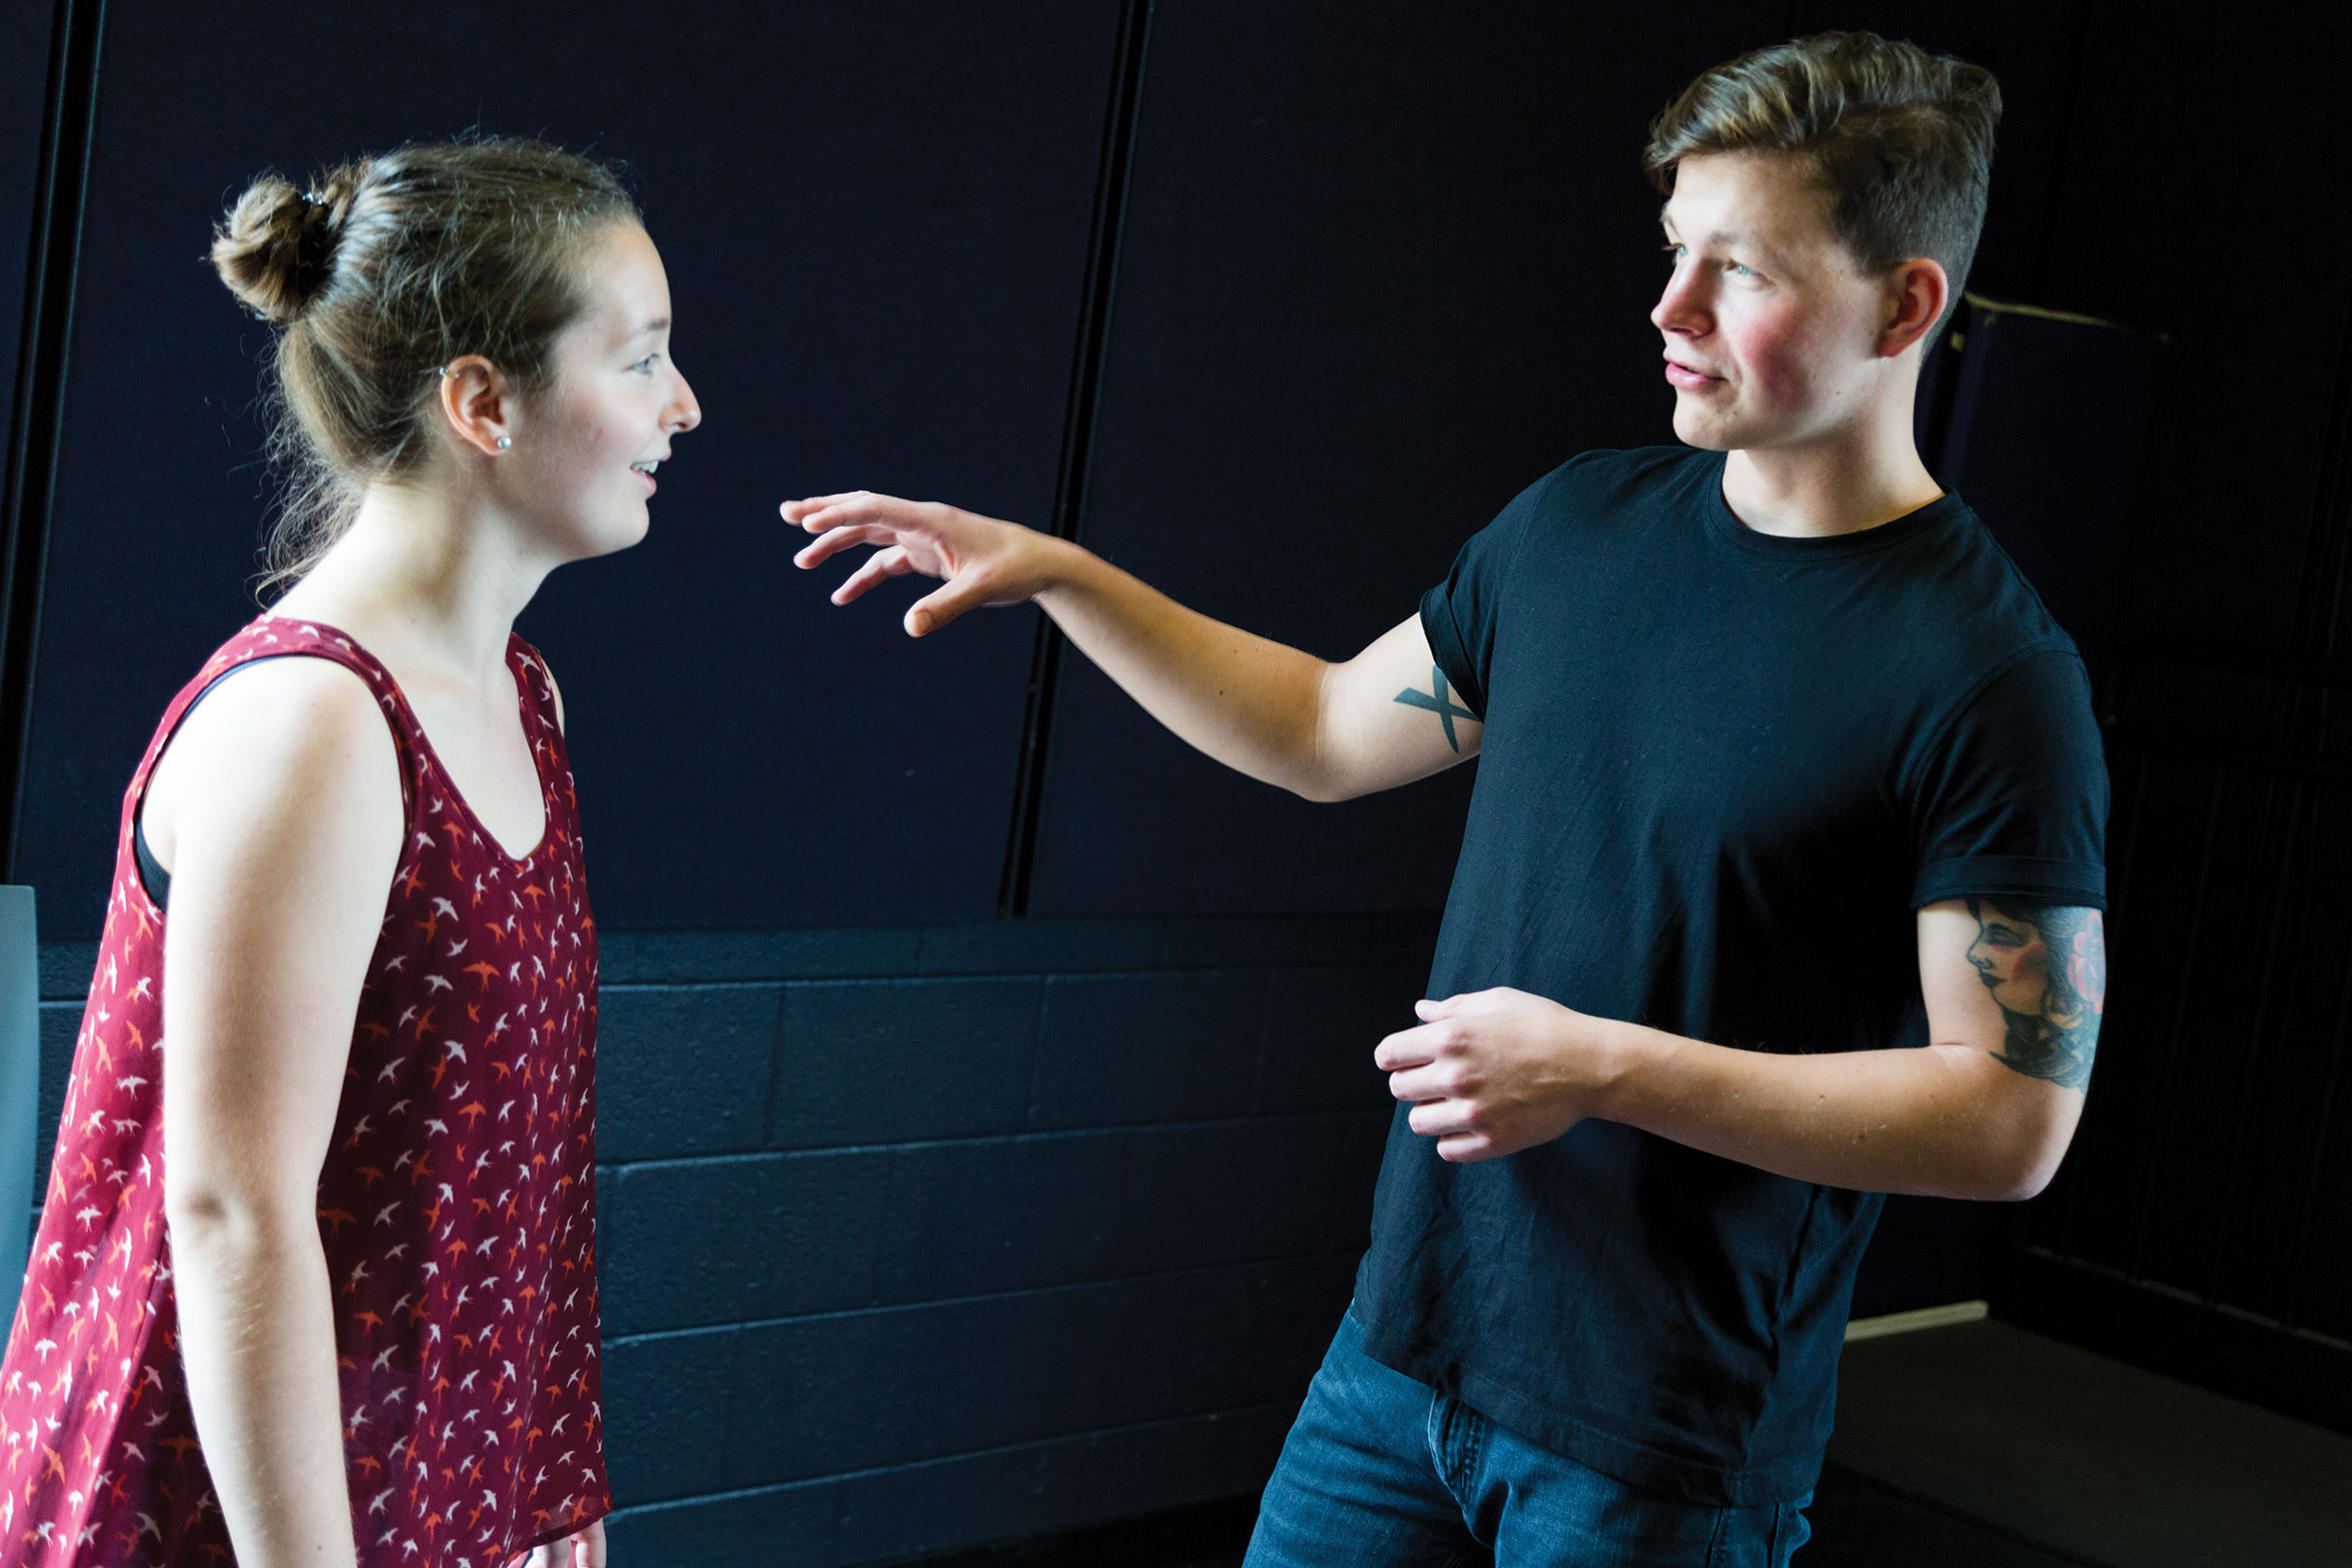 Svenja Both and Felix Ruckl participate in a theater exercise